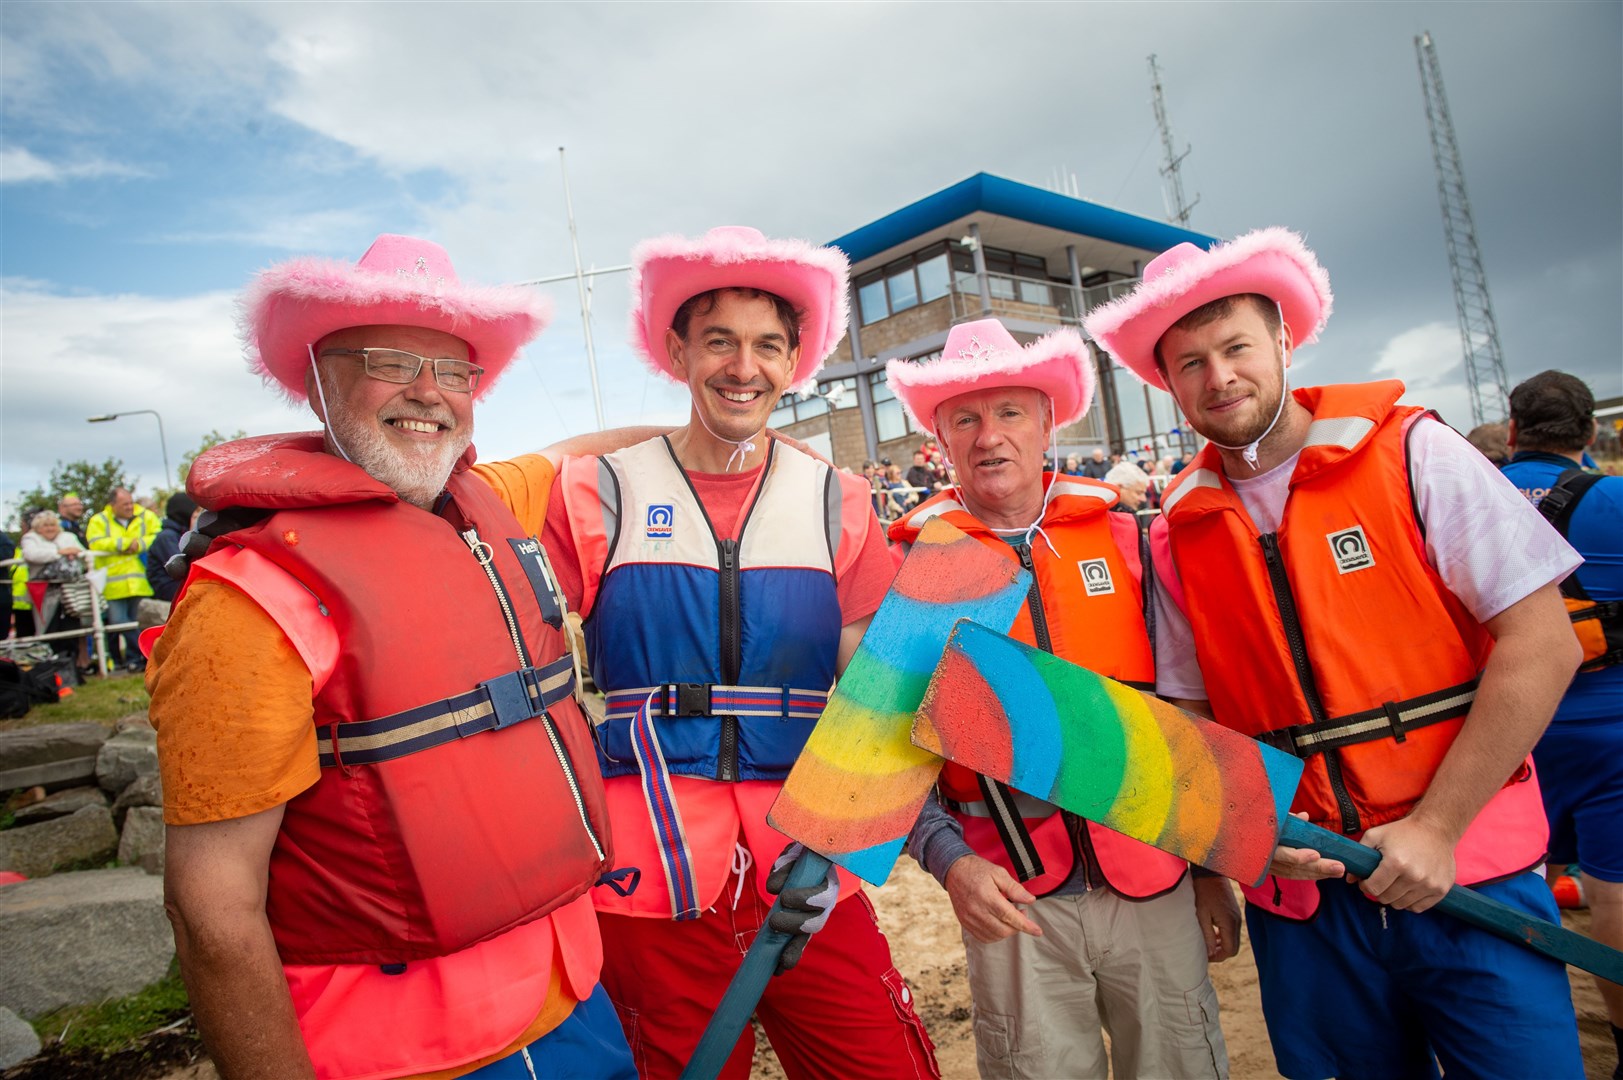 In the absence of the ever-popular Invergordon RNLI open day and raft race, cancelled this year because of the coronavirus pubic health crisis, the local branch is coming up with some alternative fundraising ideas. Picture: Callum Mackay